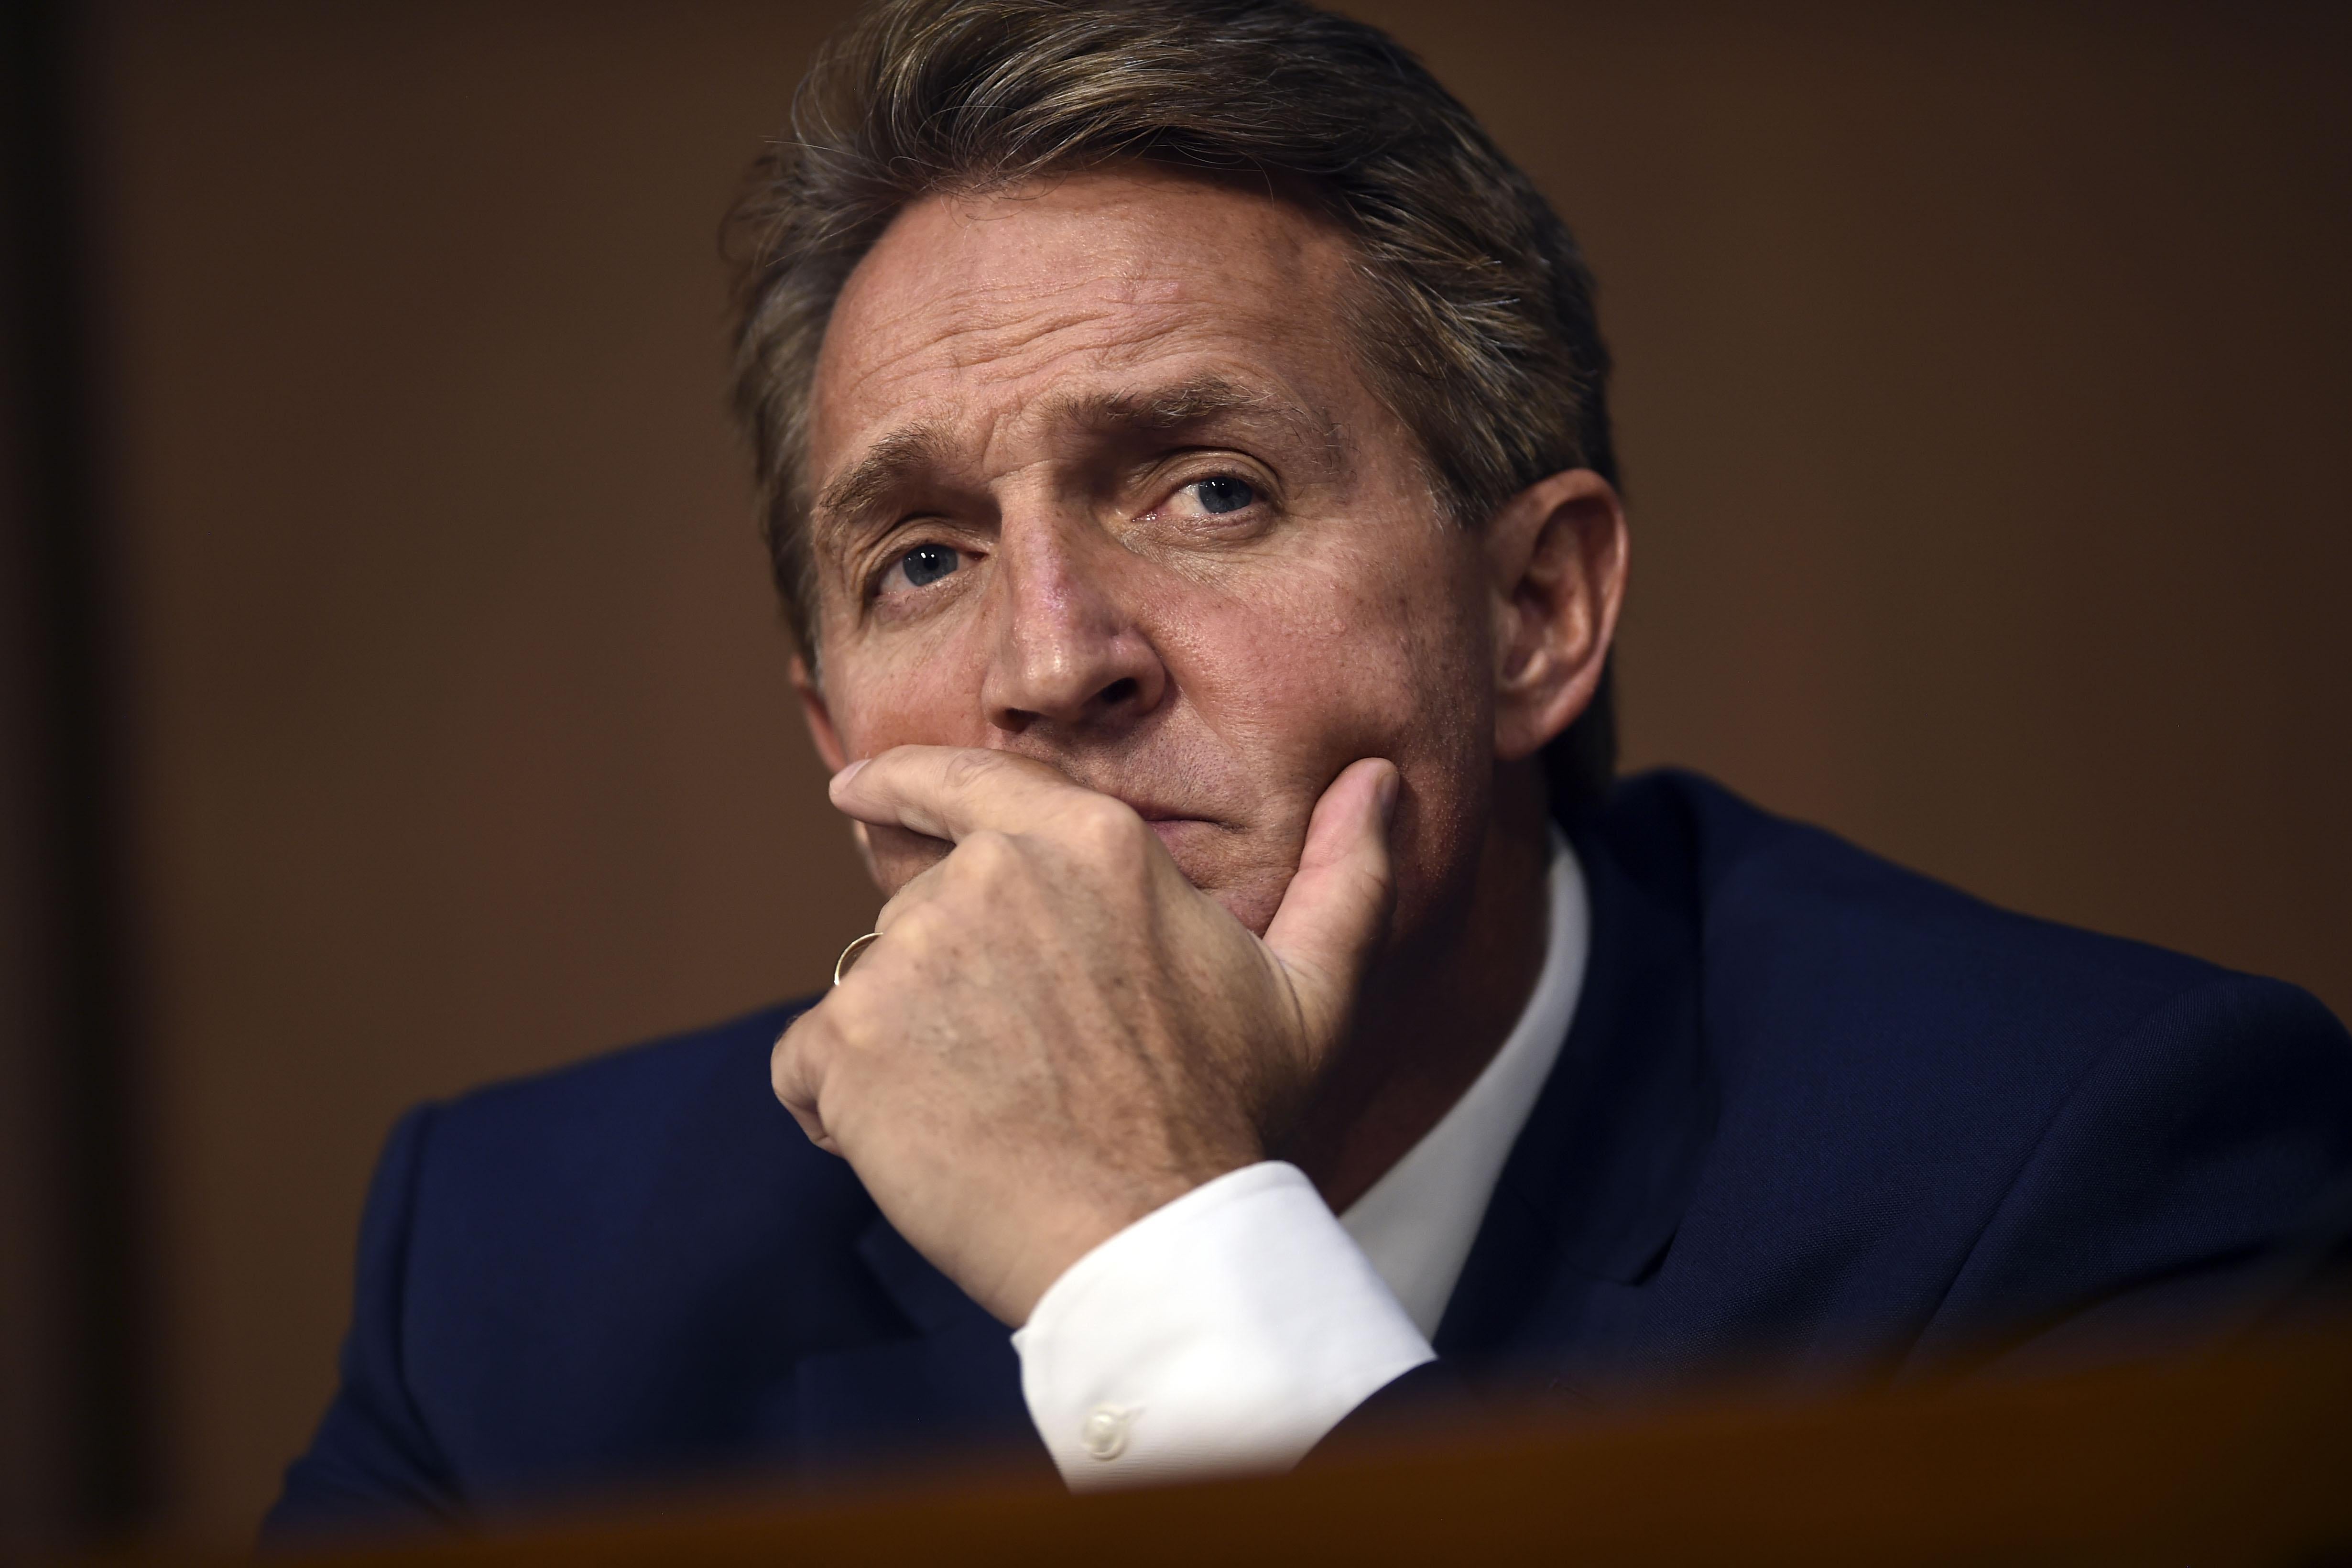 Sen. Jeff Flake listens on Tuesday during day one of Brett Kavanaugh's confirmation hearing to be on the U.S. Supreme Court.